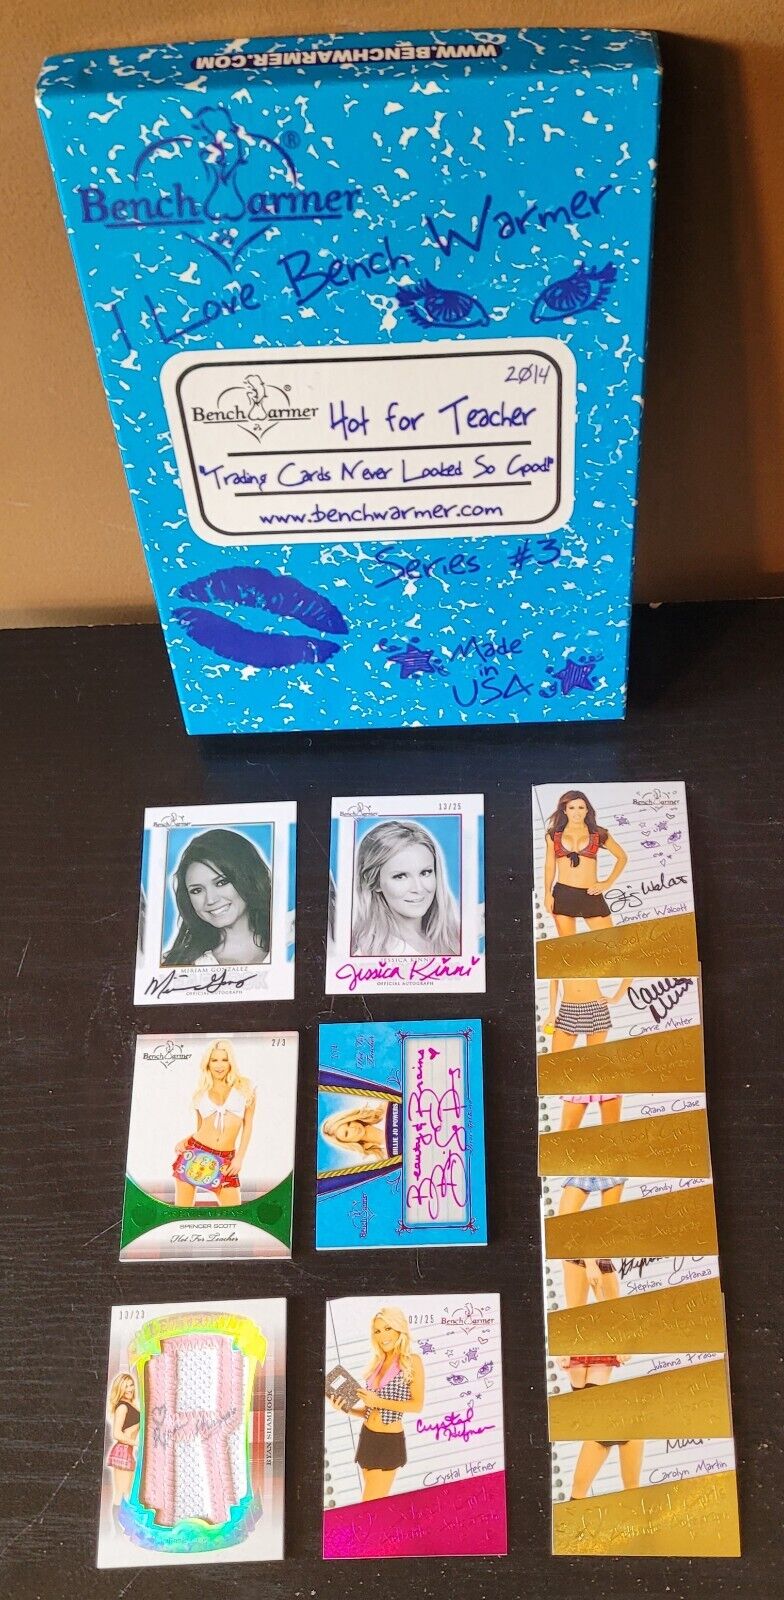 2014 BENCH WARMER HOT FOR TEACHER BOX OF (13) WITH RARE INSERTS & AUTOGRAPHS #1